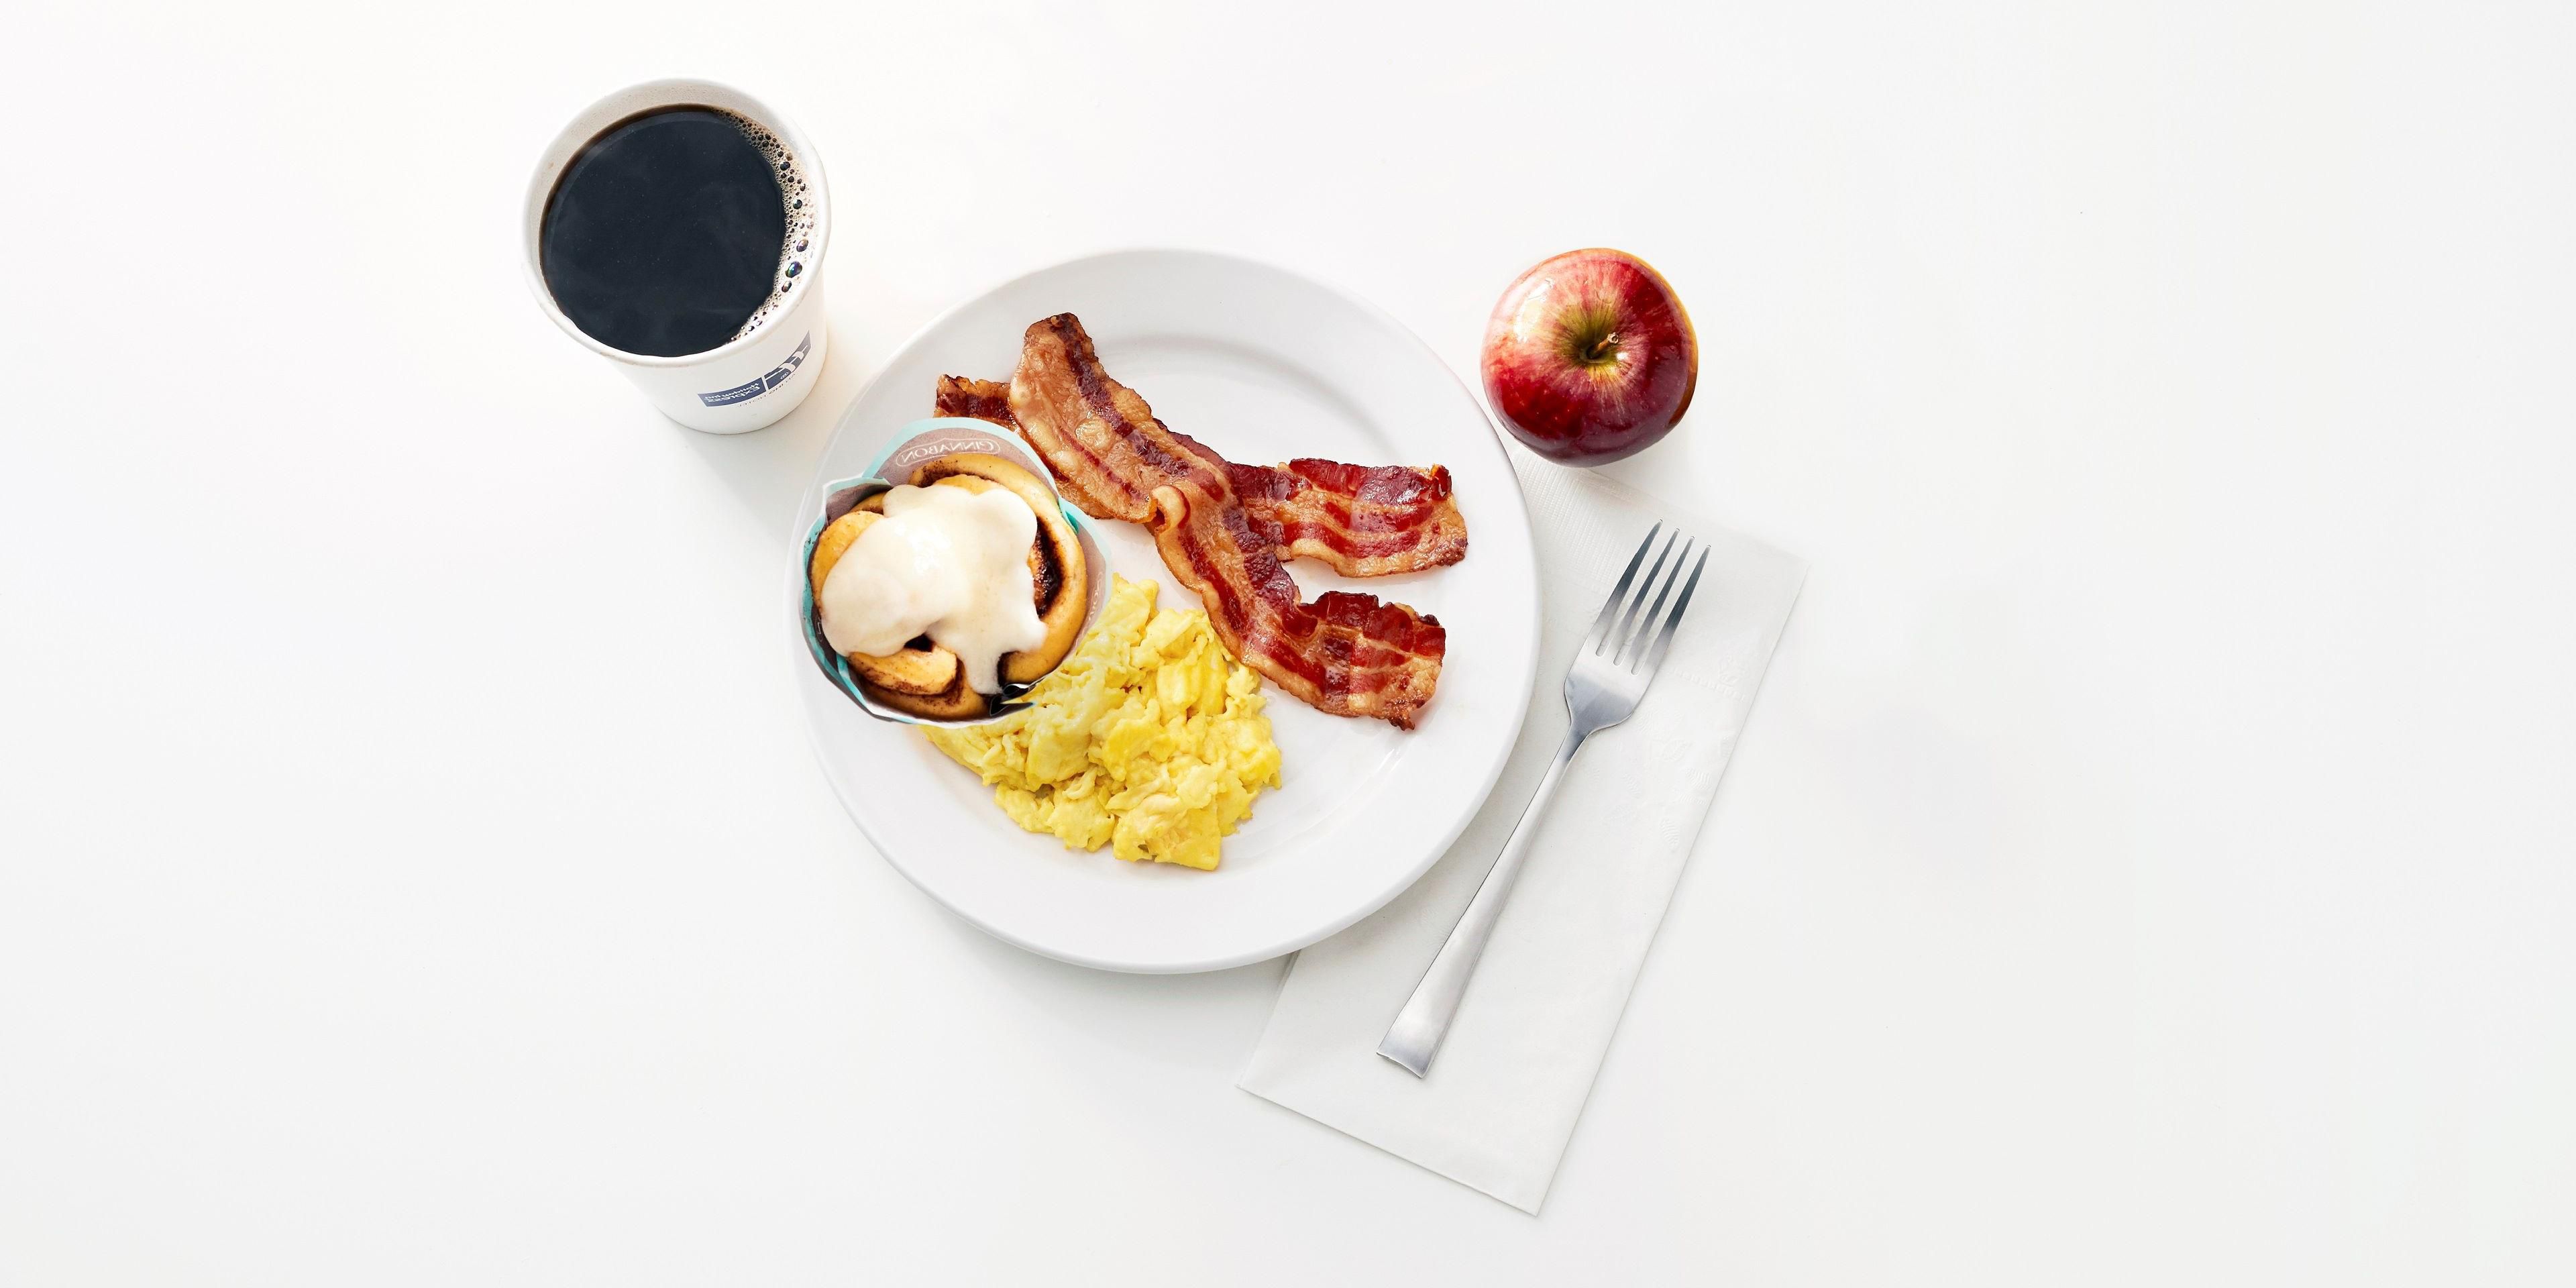 Kick start your day with our Express Start Breakfast, with grab ‘n’ go options and favourites such as eggs and bacon, hot pancakes, our signature cinnamon rolls and fresh coffee. Offered from 6:30 AM to 9:30 AM daily.